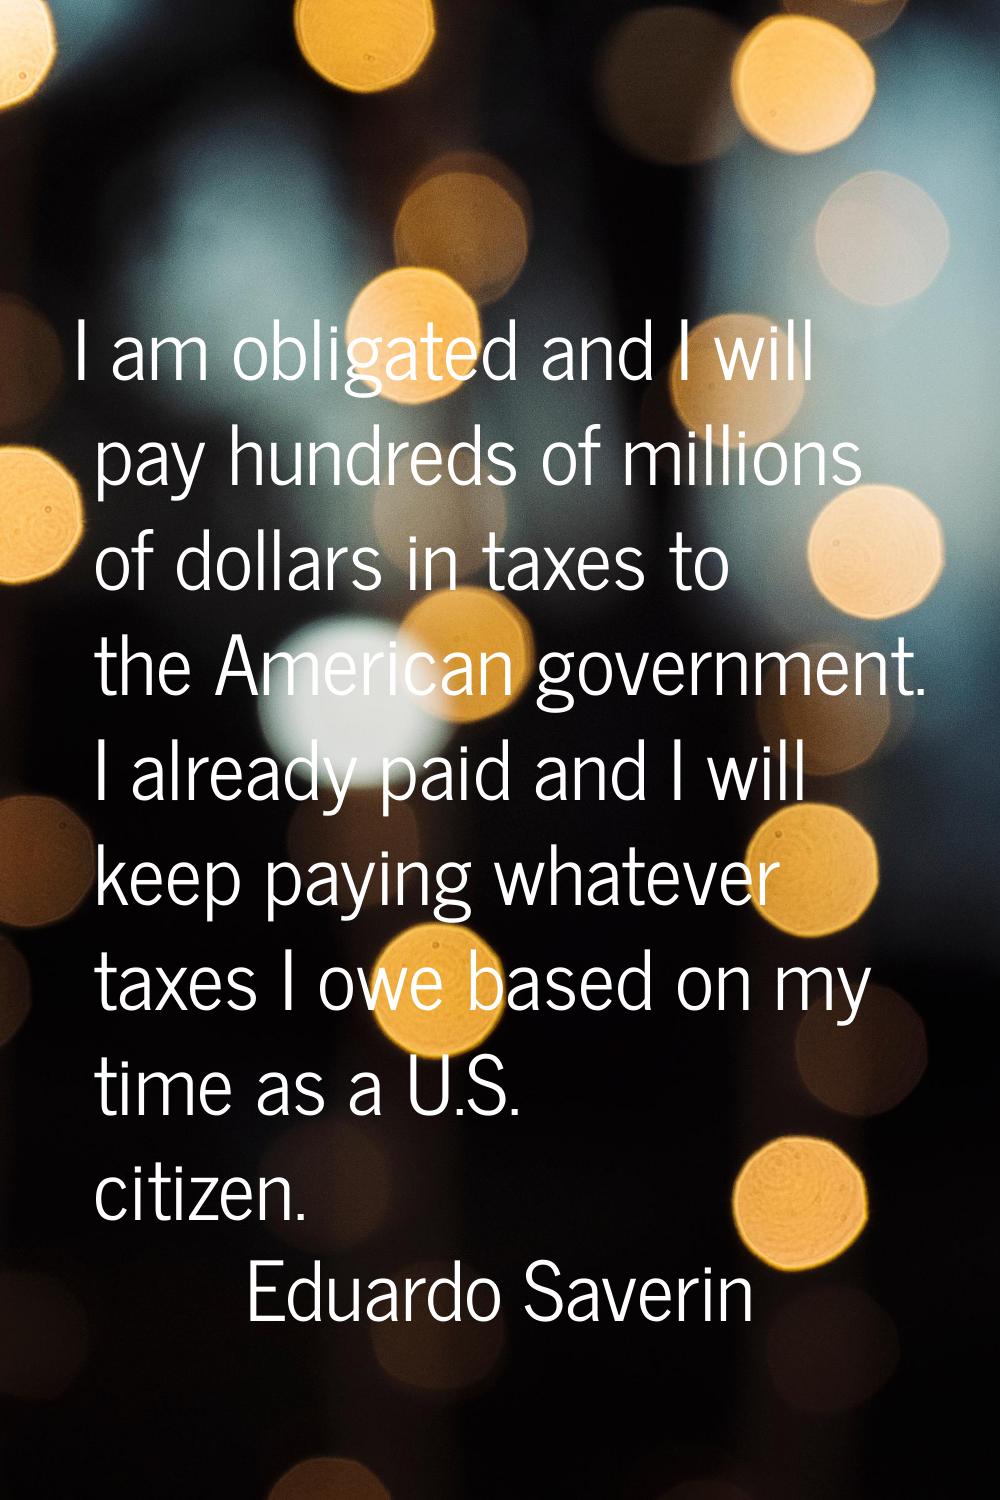 I am obligated and I will pay hundreds of millions of dollars in taxes to the American government. 